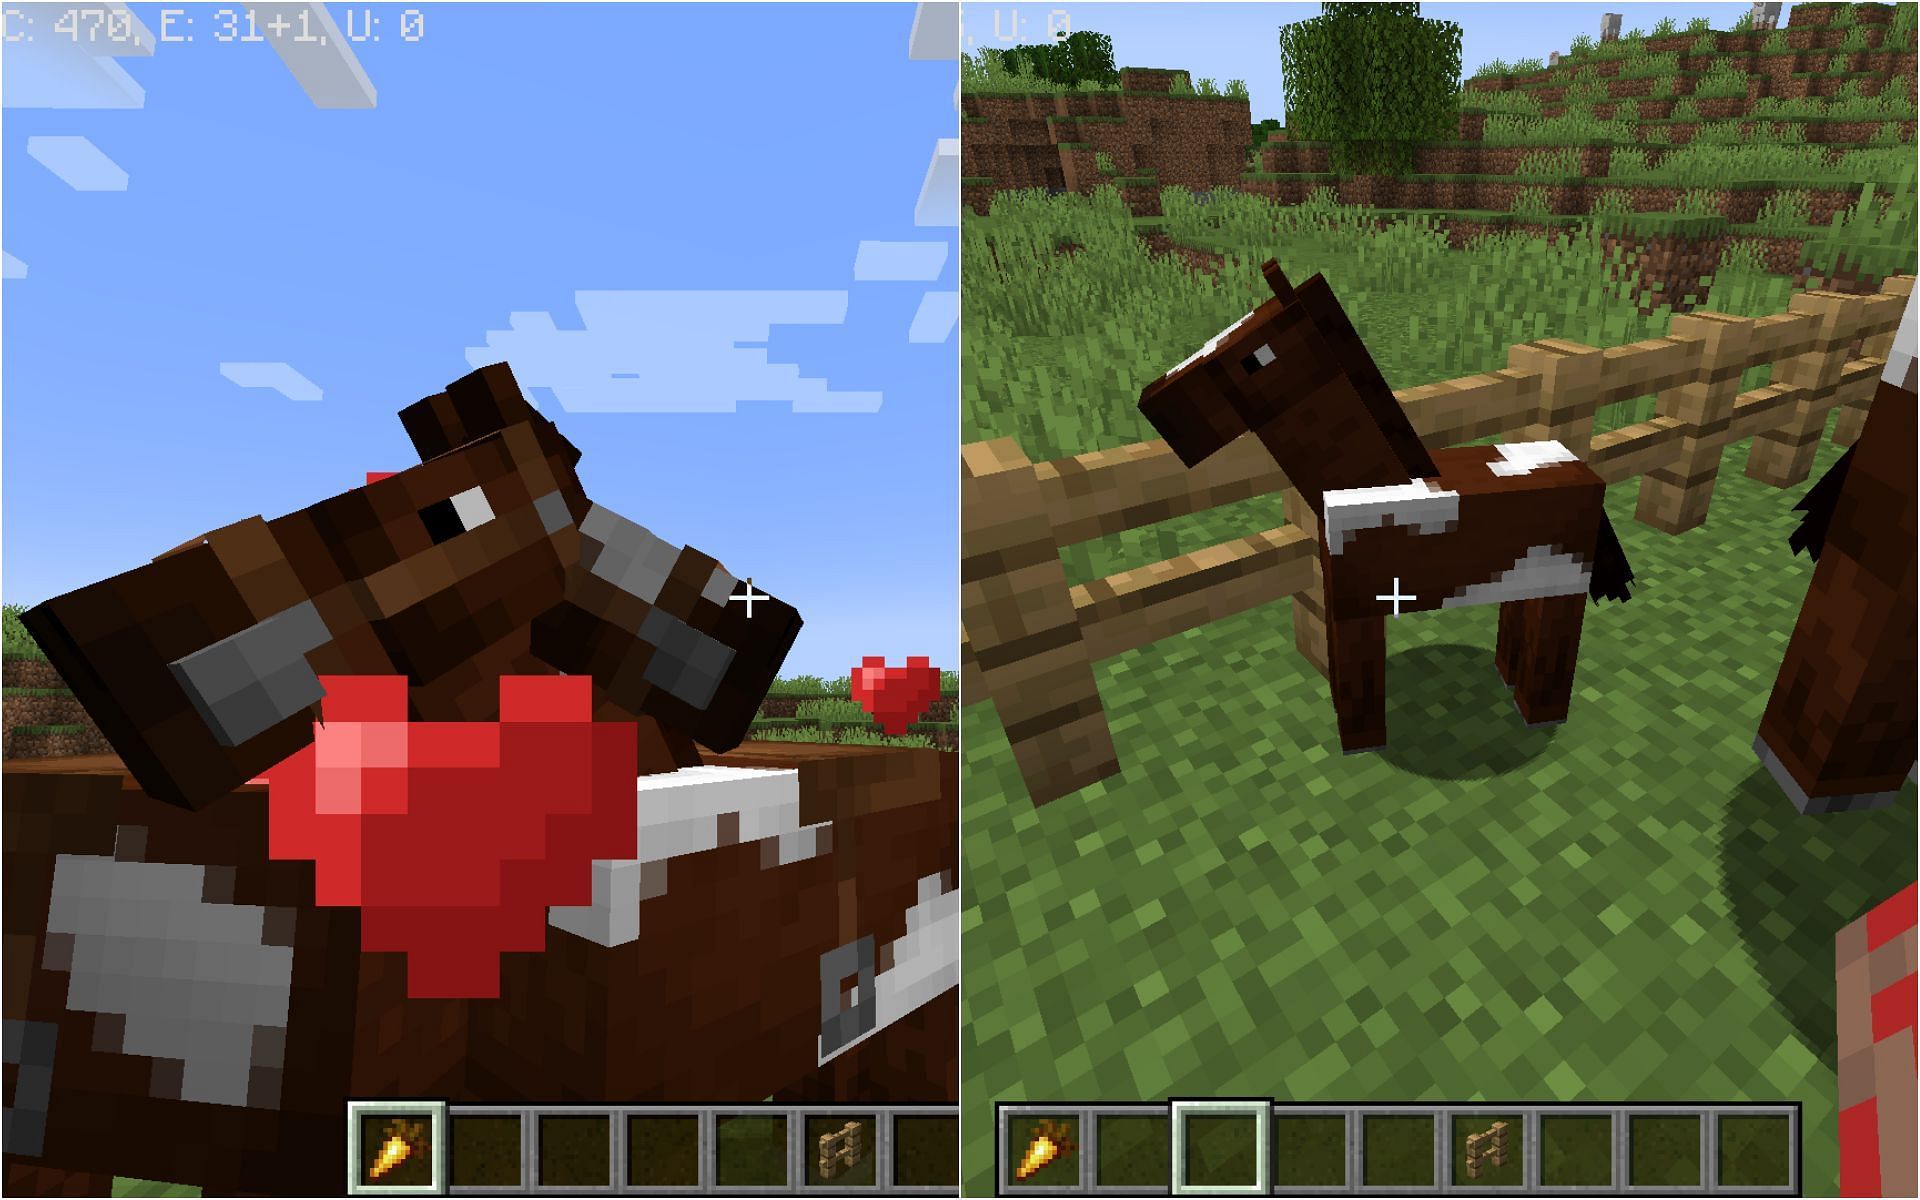 Mobs entering love mode and a foal spawning (Image via Minecraft)